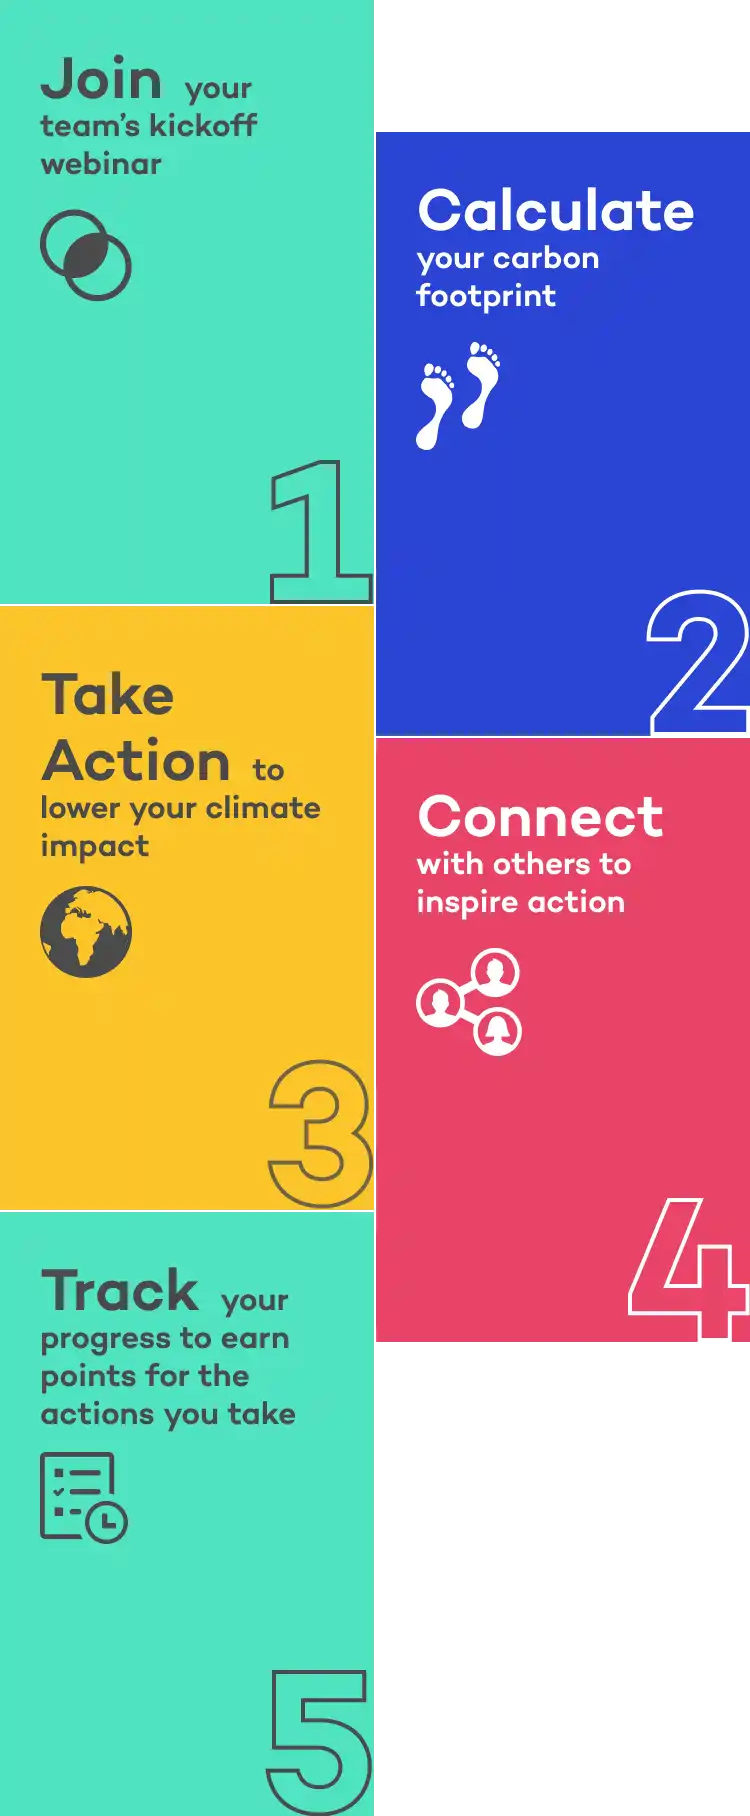 1. Join your team's kickoff webinar 2. Calculate your carbon footprint 3. Take Action to lower your climate impact 4. Connect with others to inspire more action 5. Track your progress to earn points for the actions you take